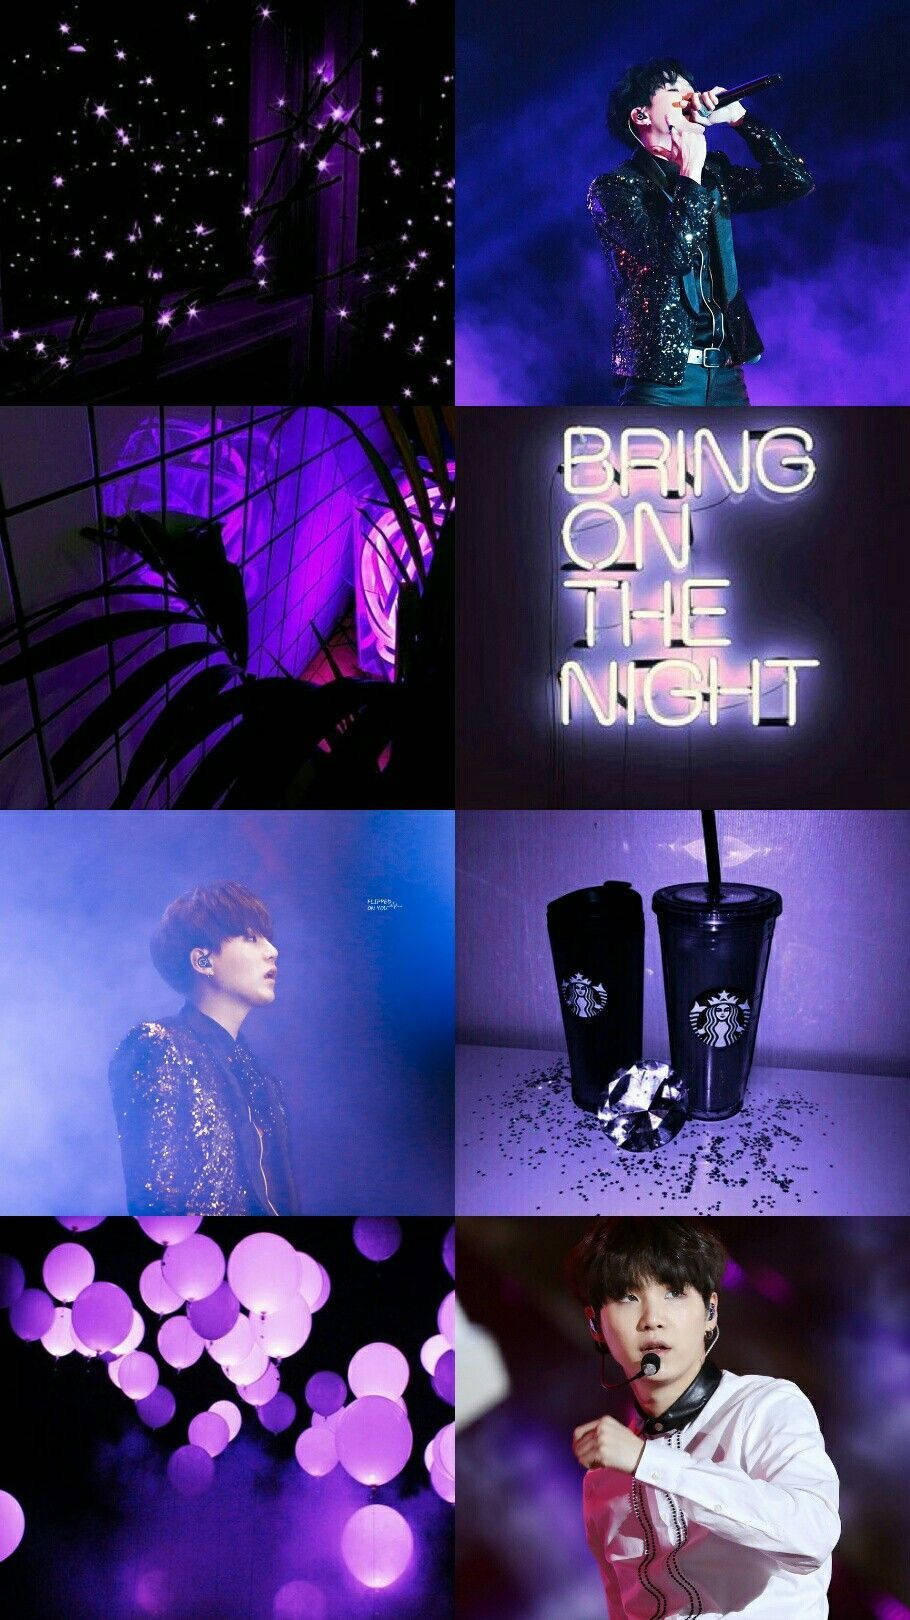 BTS aesthetic wallpaper for phone backgrounds! If you use it, please give credit to the artist! - Suga